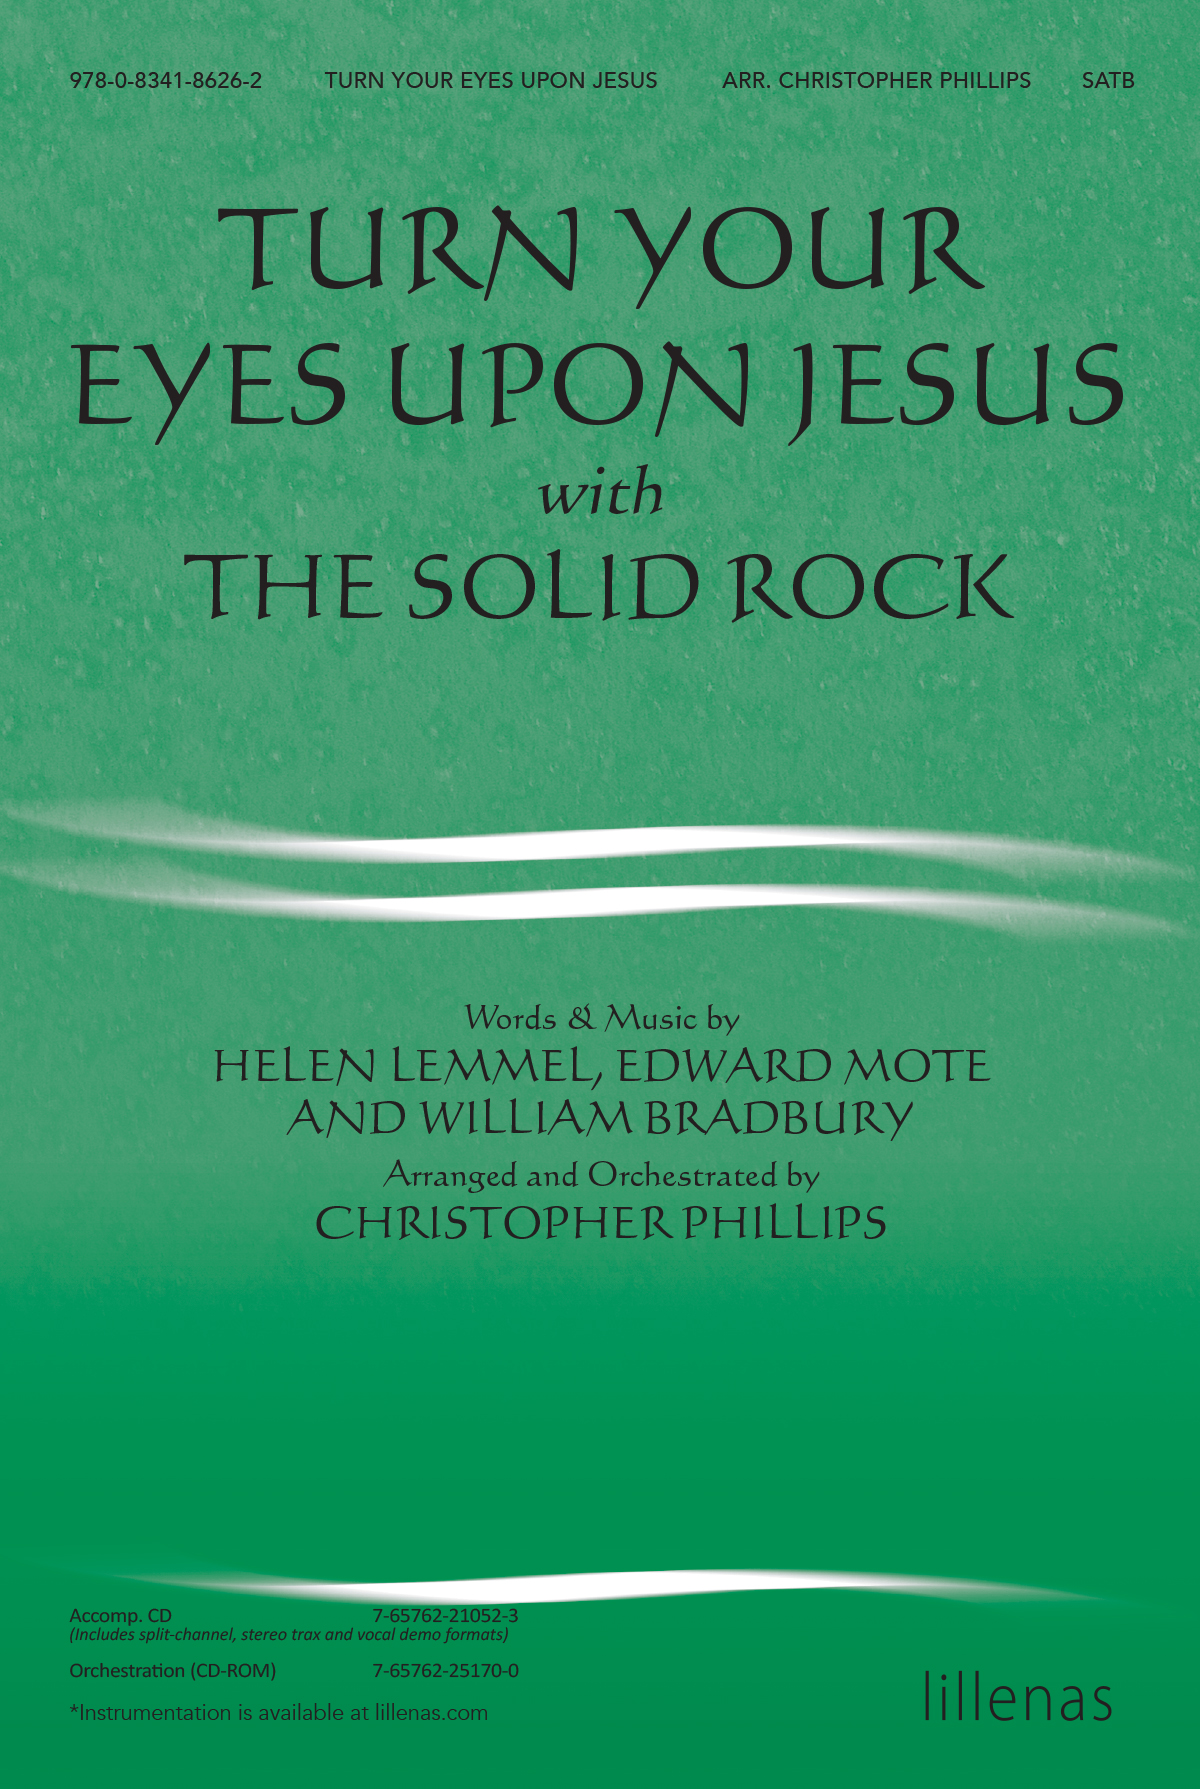 Turn Your Eyes Upon Jesus with The Solid Rock